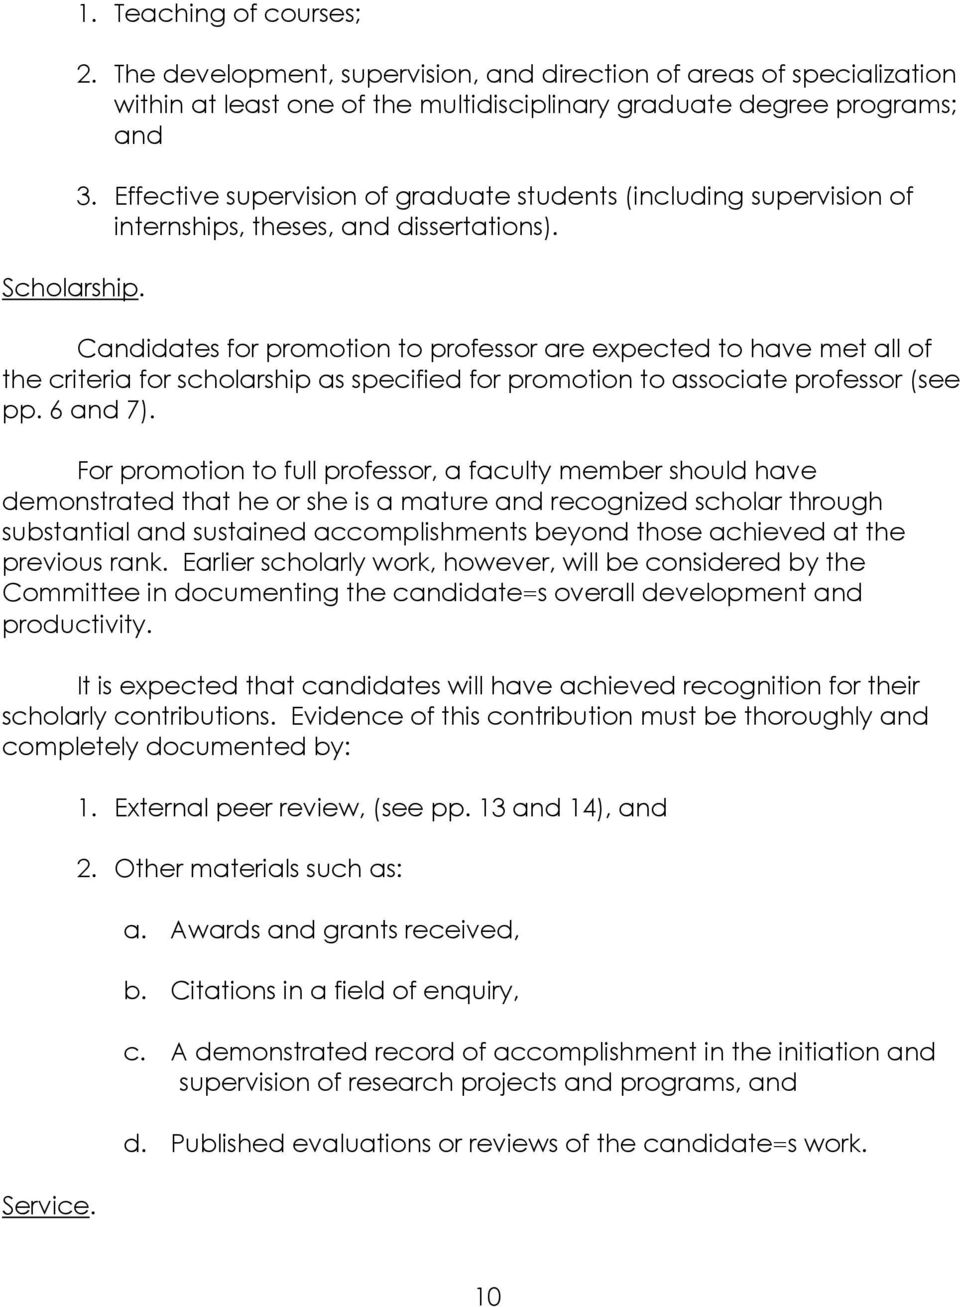 Candidates for promotion to professor are expected to have met all of the criteria for scholarship as specified for promotion to associate professor (see pp. 6 and 7).